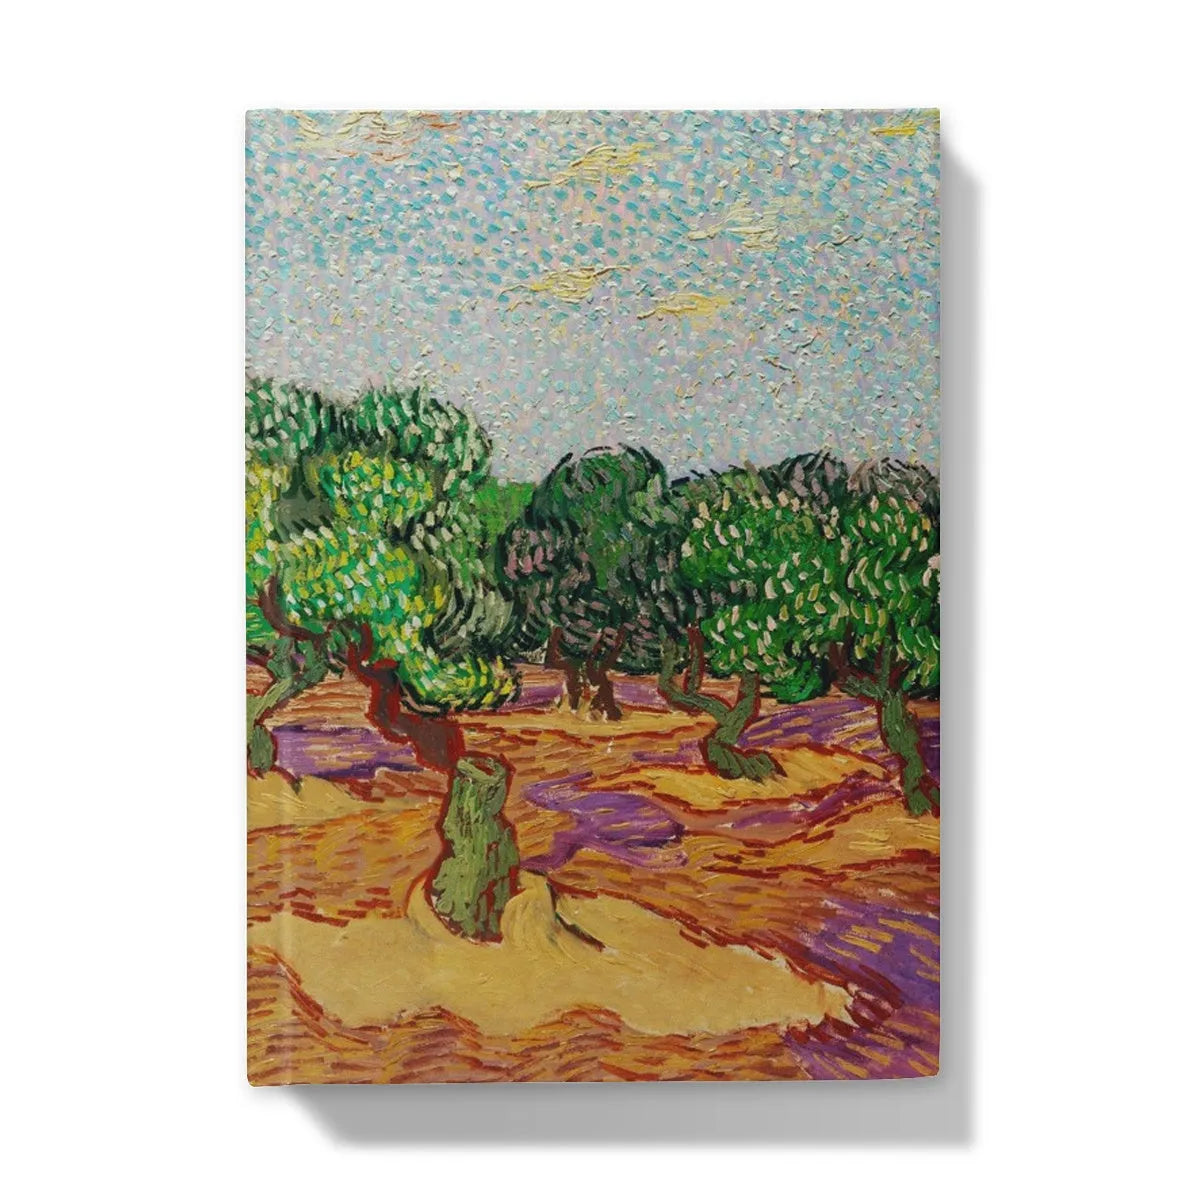 Olive Trees By Vincent Van Gogh Hardback Journal - 5’x7’ / Lined - Notebooks & Notepads - Aesthetic Art